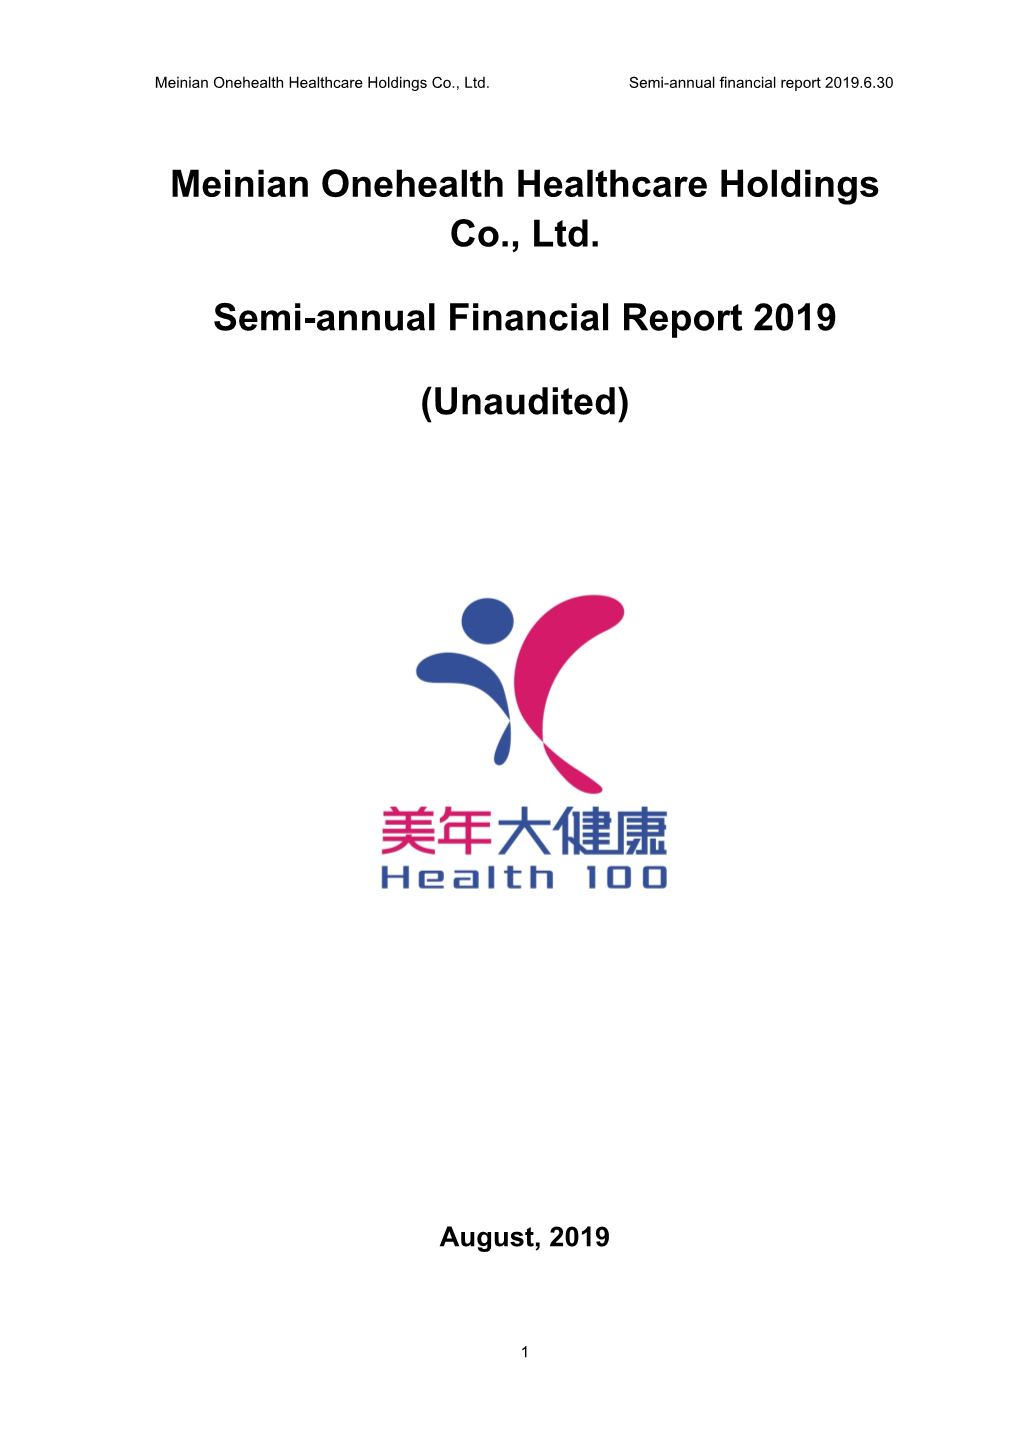 Meinian Onehealth Healthcare Holdings Co., Ltd. Semi-Annual Financial Report 2019.6.30